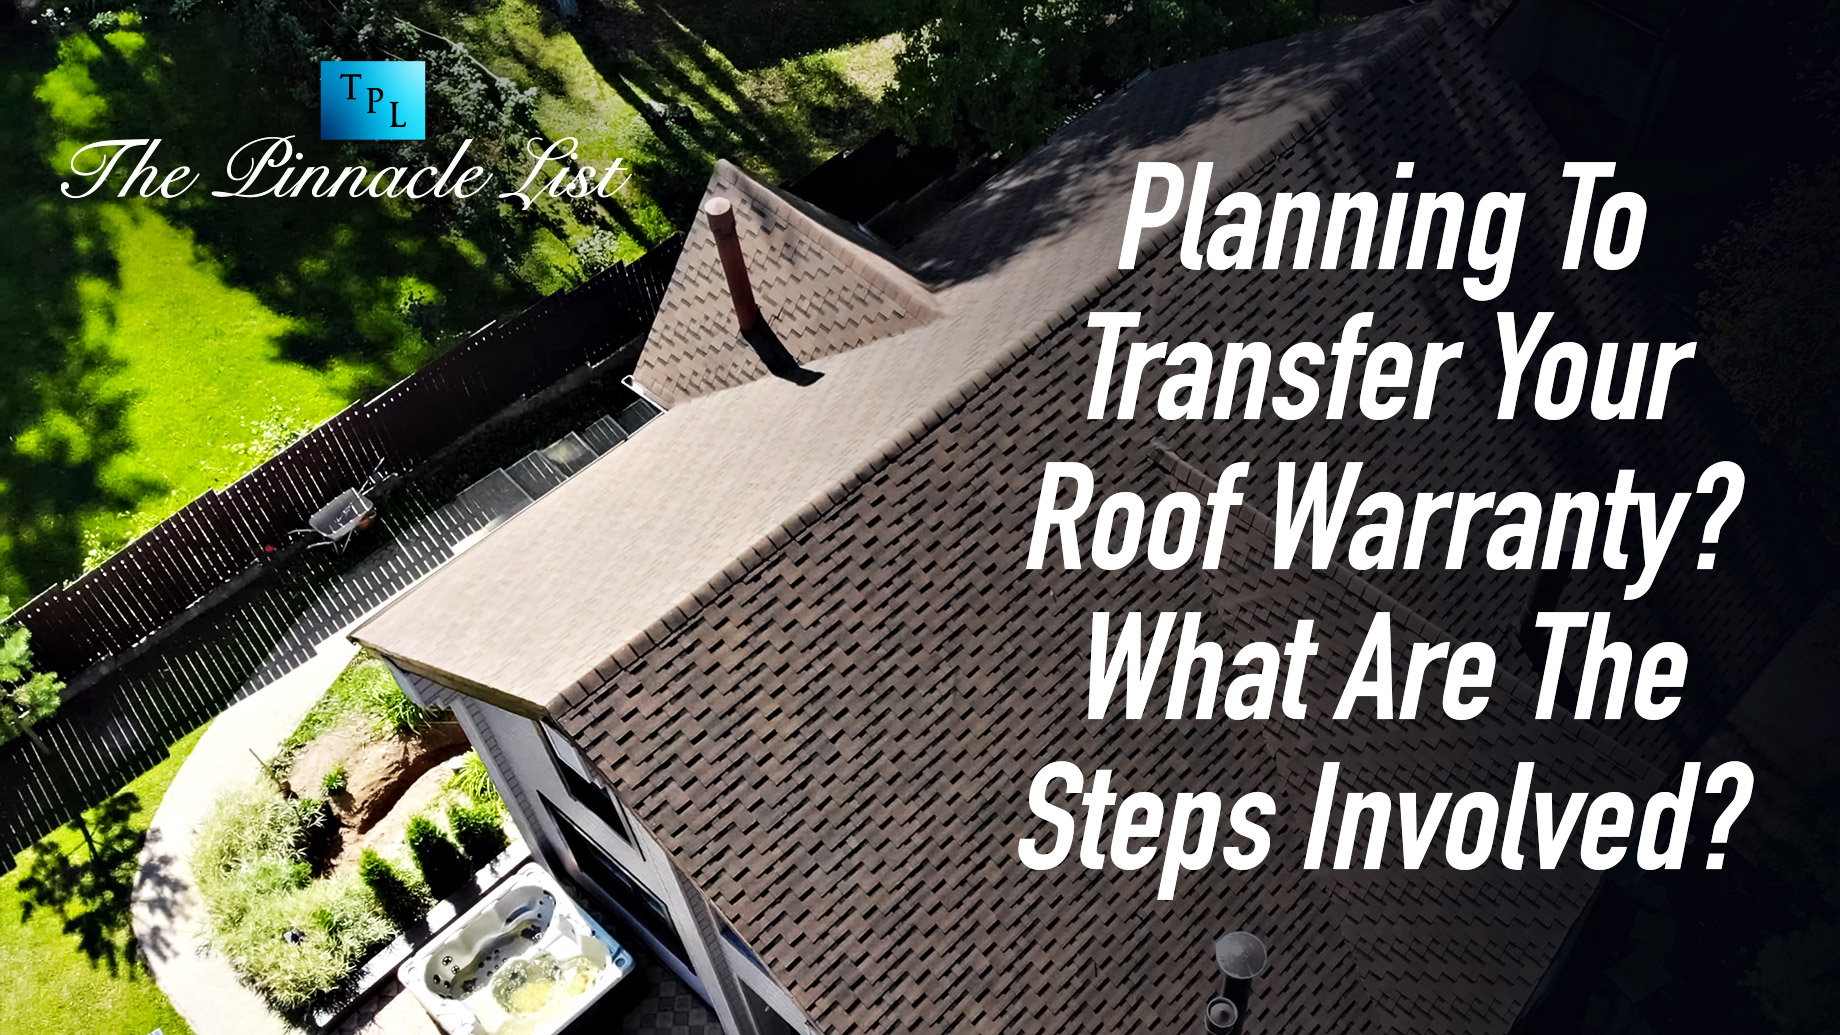 Planning To Transfer Your Roof Warranty? What Are The Steps Involved?